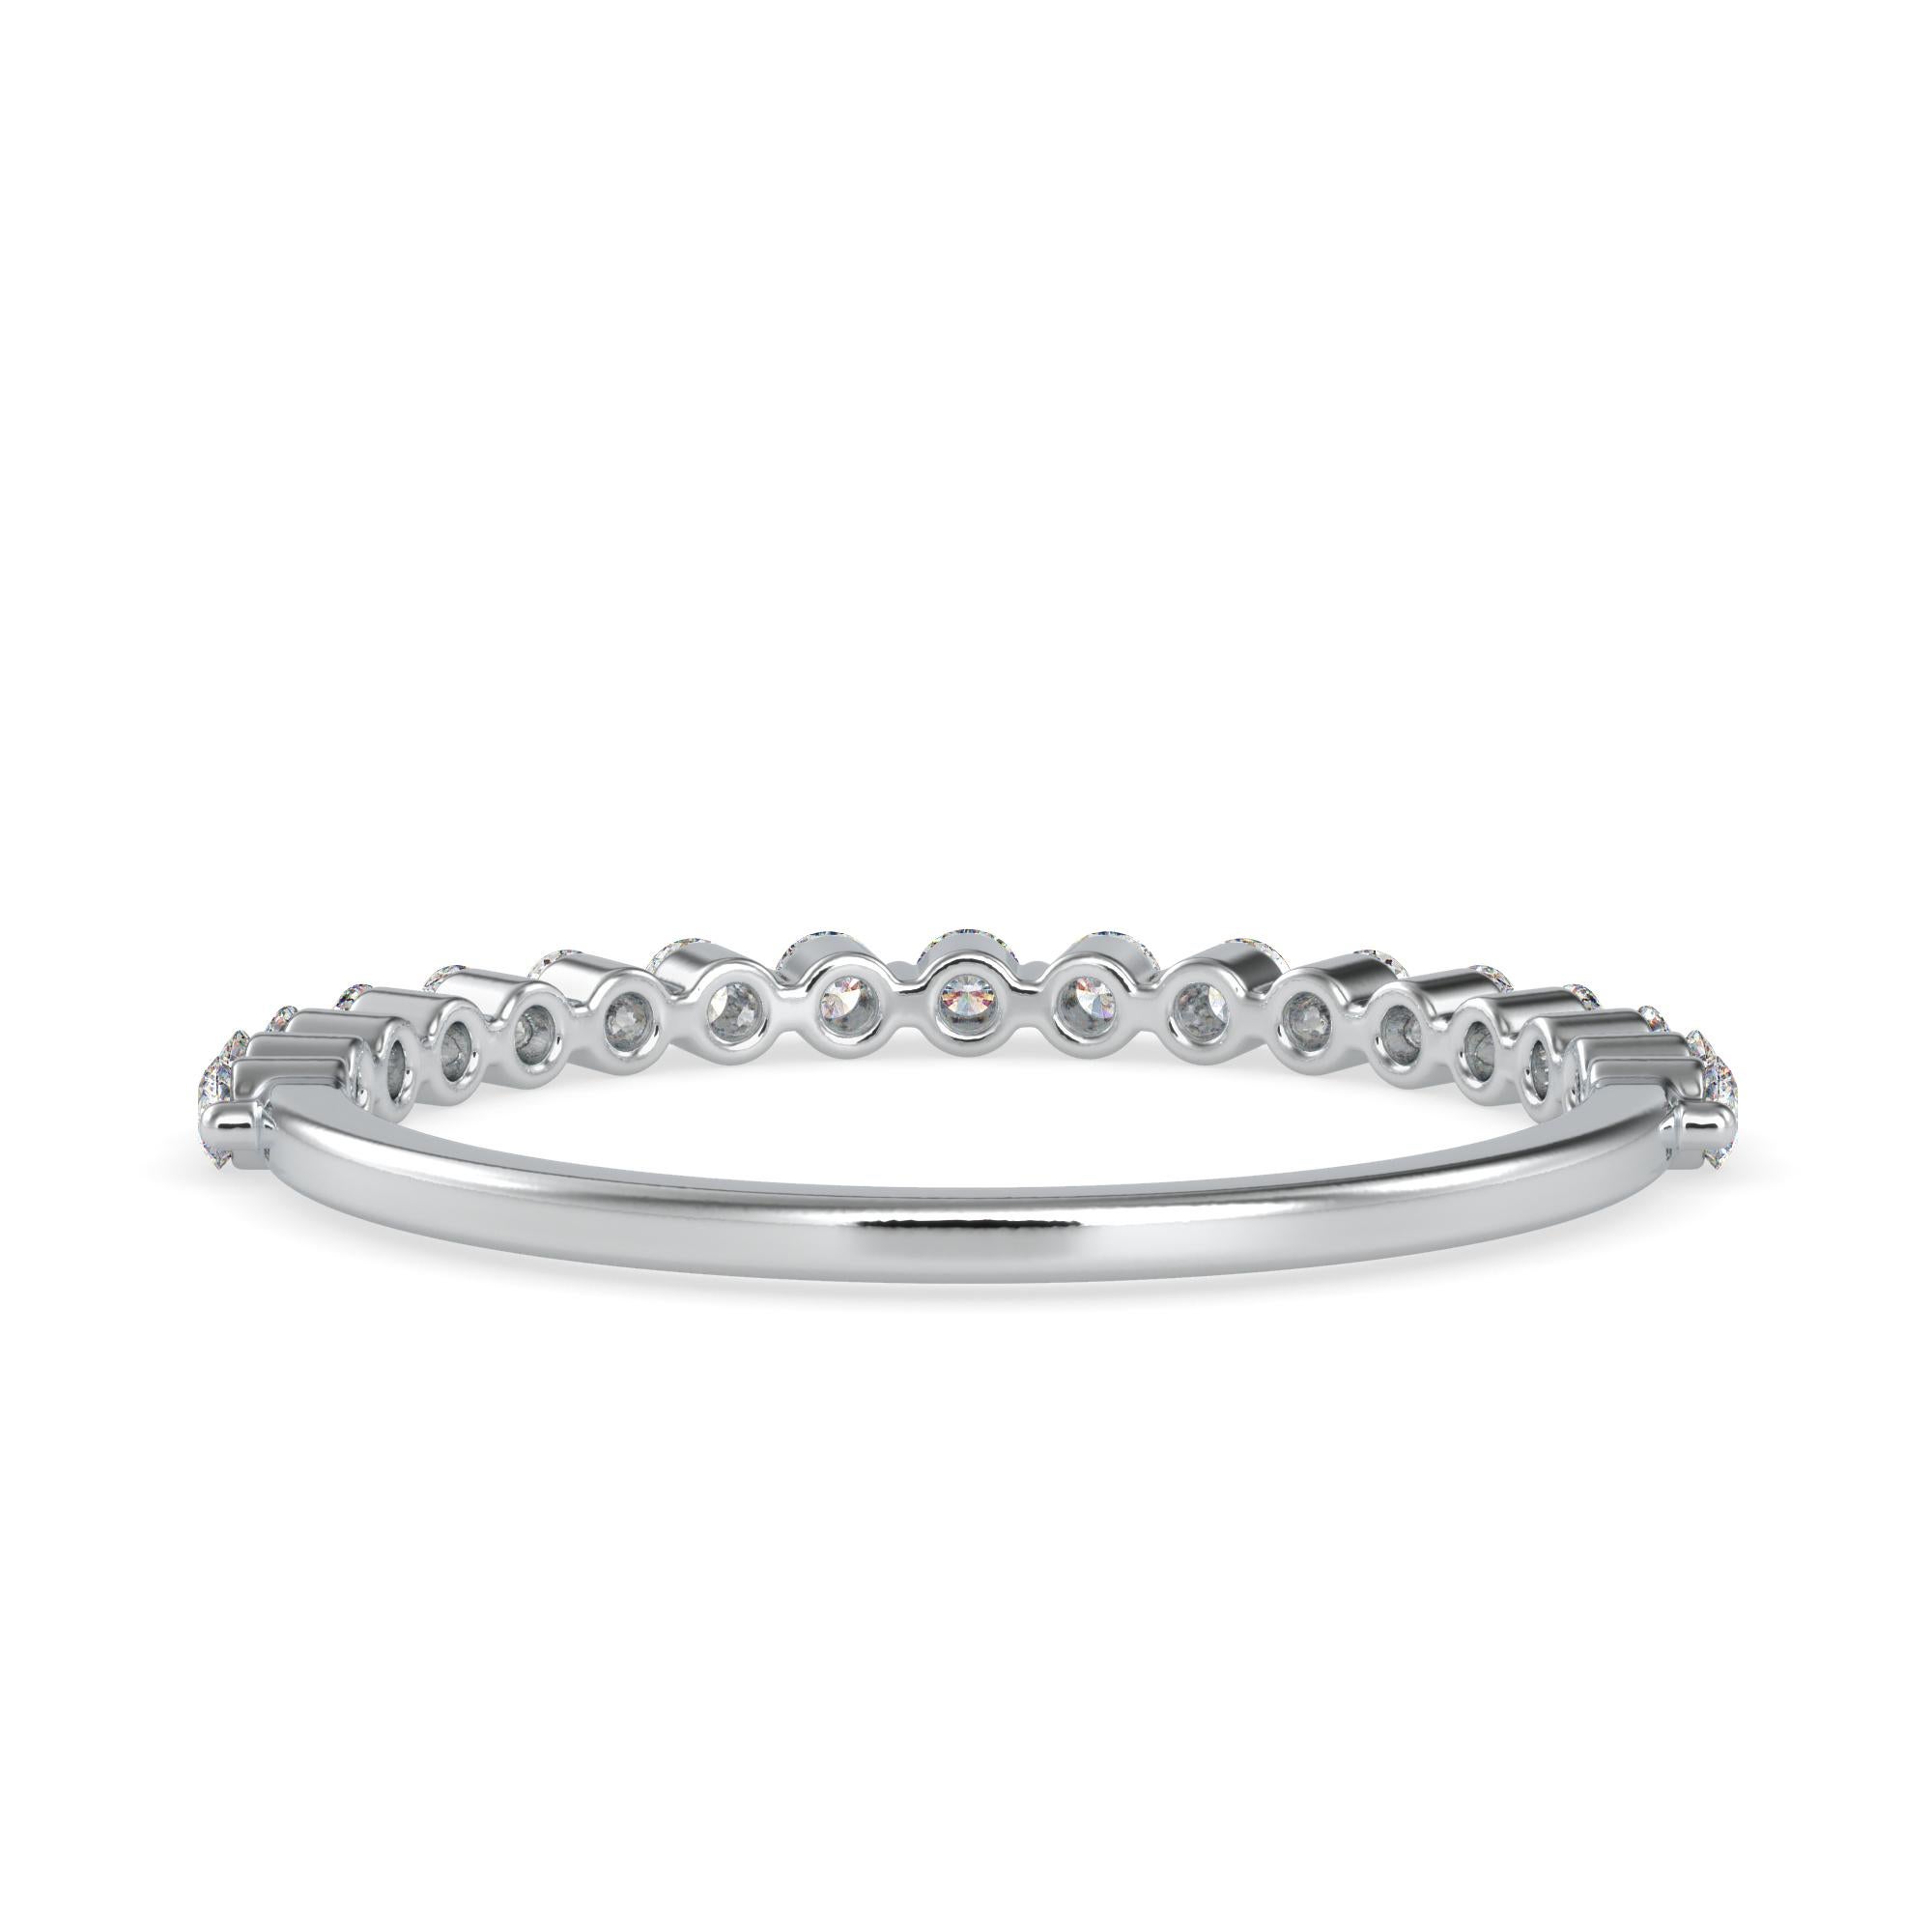 0.26 Carat Diamond 14K White Gold Ring
Stamped: 14K 
Total Ring Weight: 1.3 Grams
Diamond Weight: 0.26 Carat (F-G Color, VS2-SI1 Clarity) 1.6 Millimeters 
Diamond Quantity: 17 
SKU: [500029]